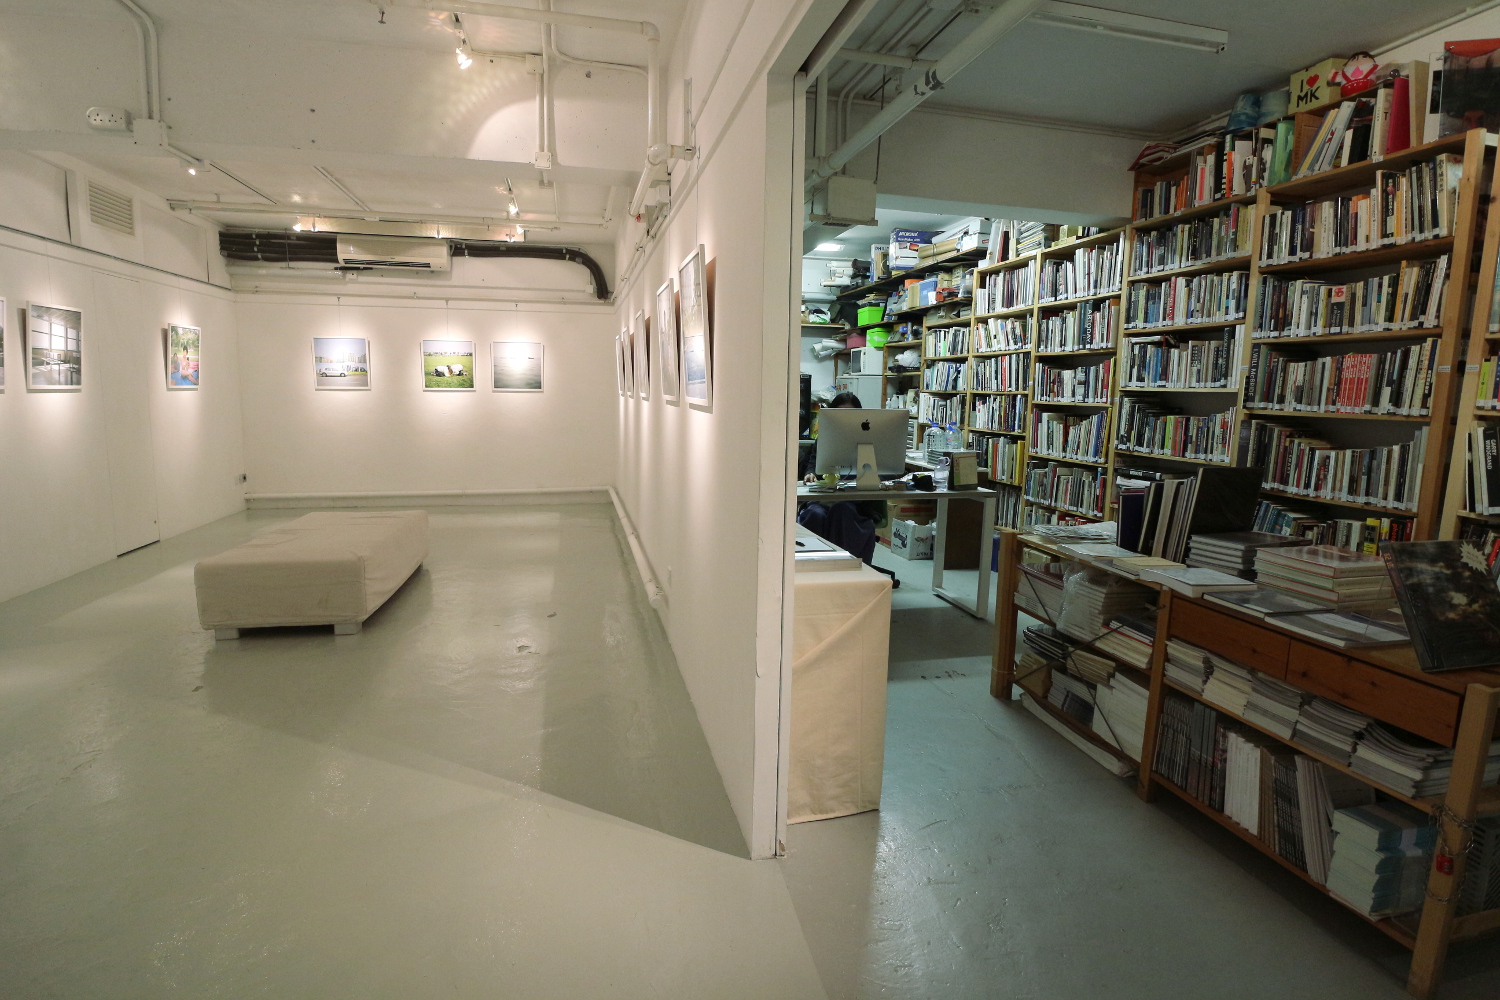 Lumen Visum photography exhibition and library. Image by Piera Chen / londoninfopage